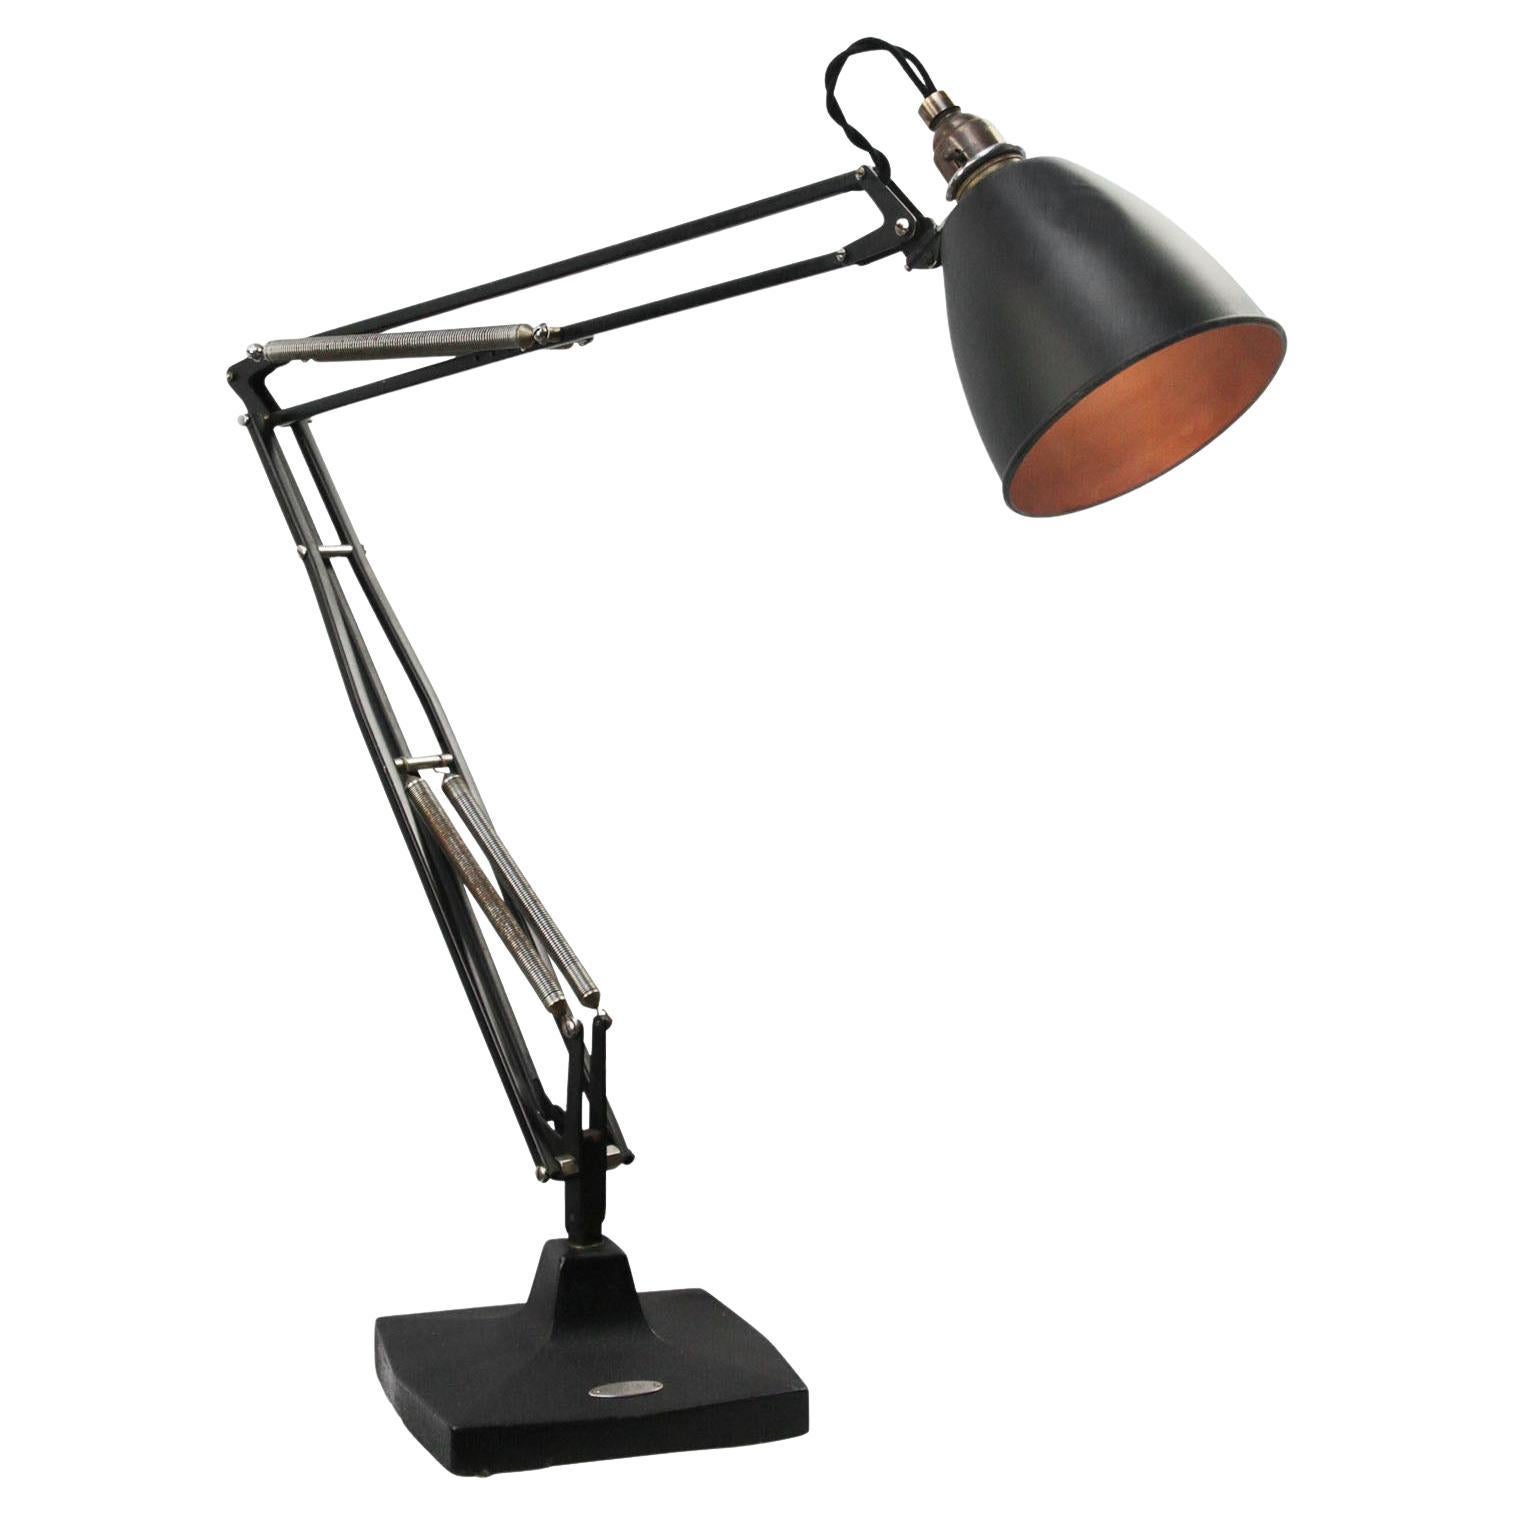 Aluminum and Iron Anglepoise 1208 Table Lamp from Herbert Terry & Sons